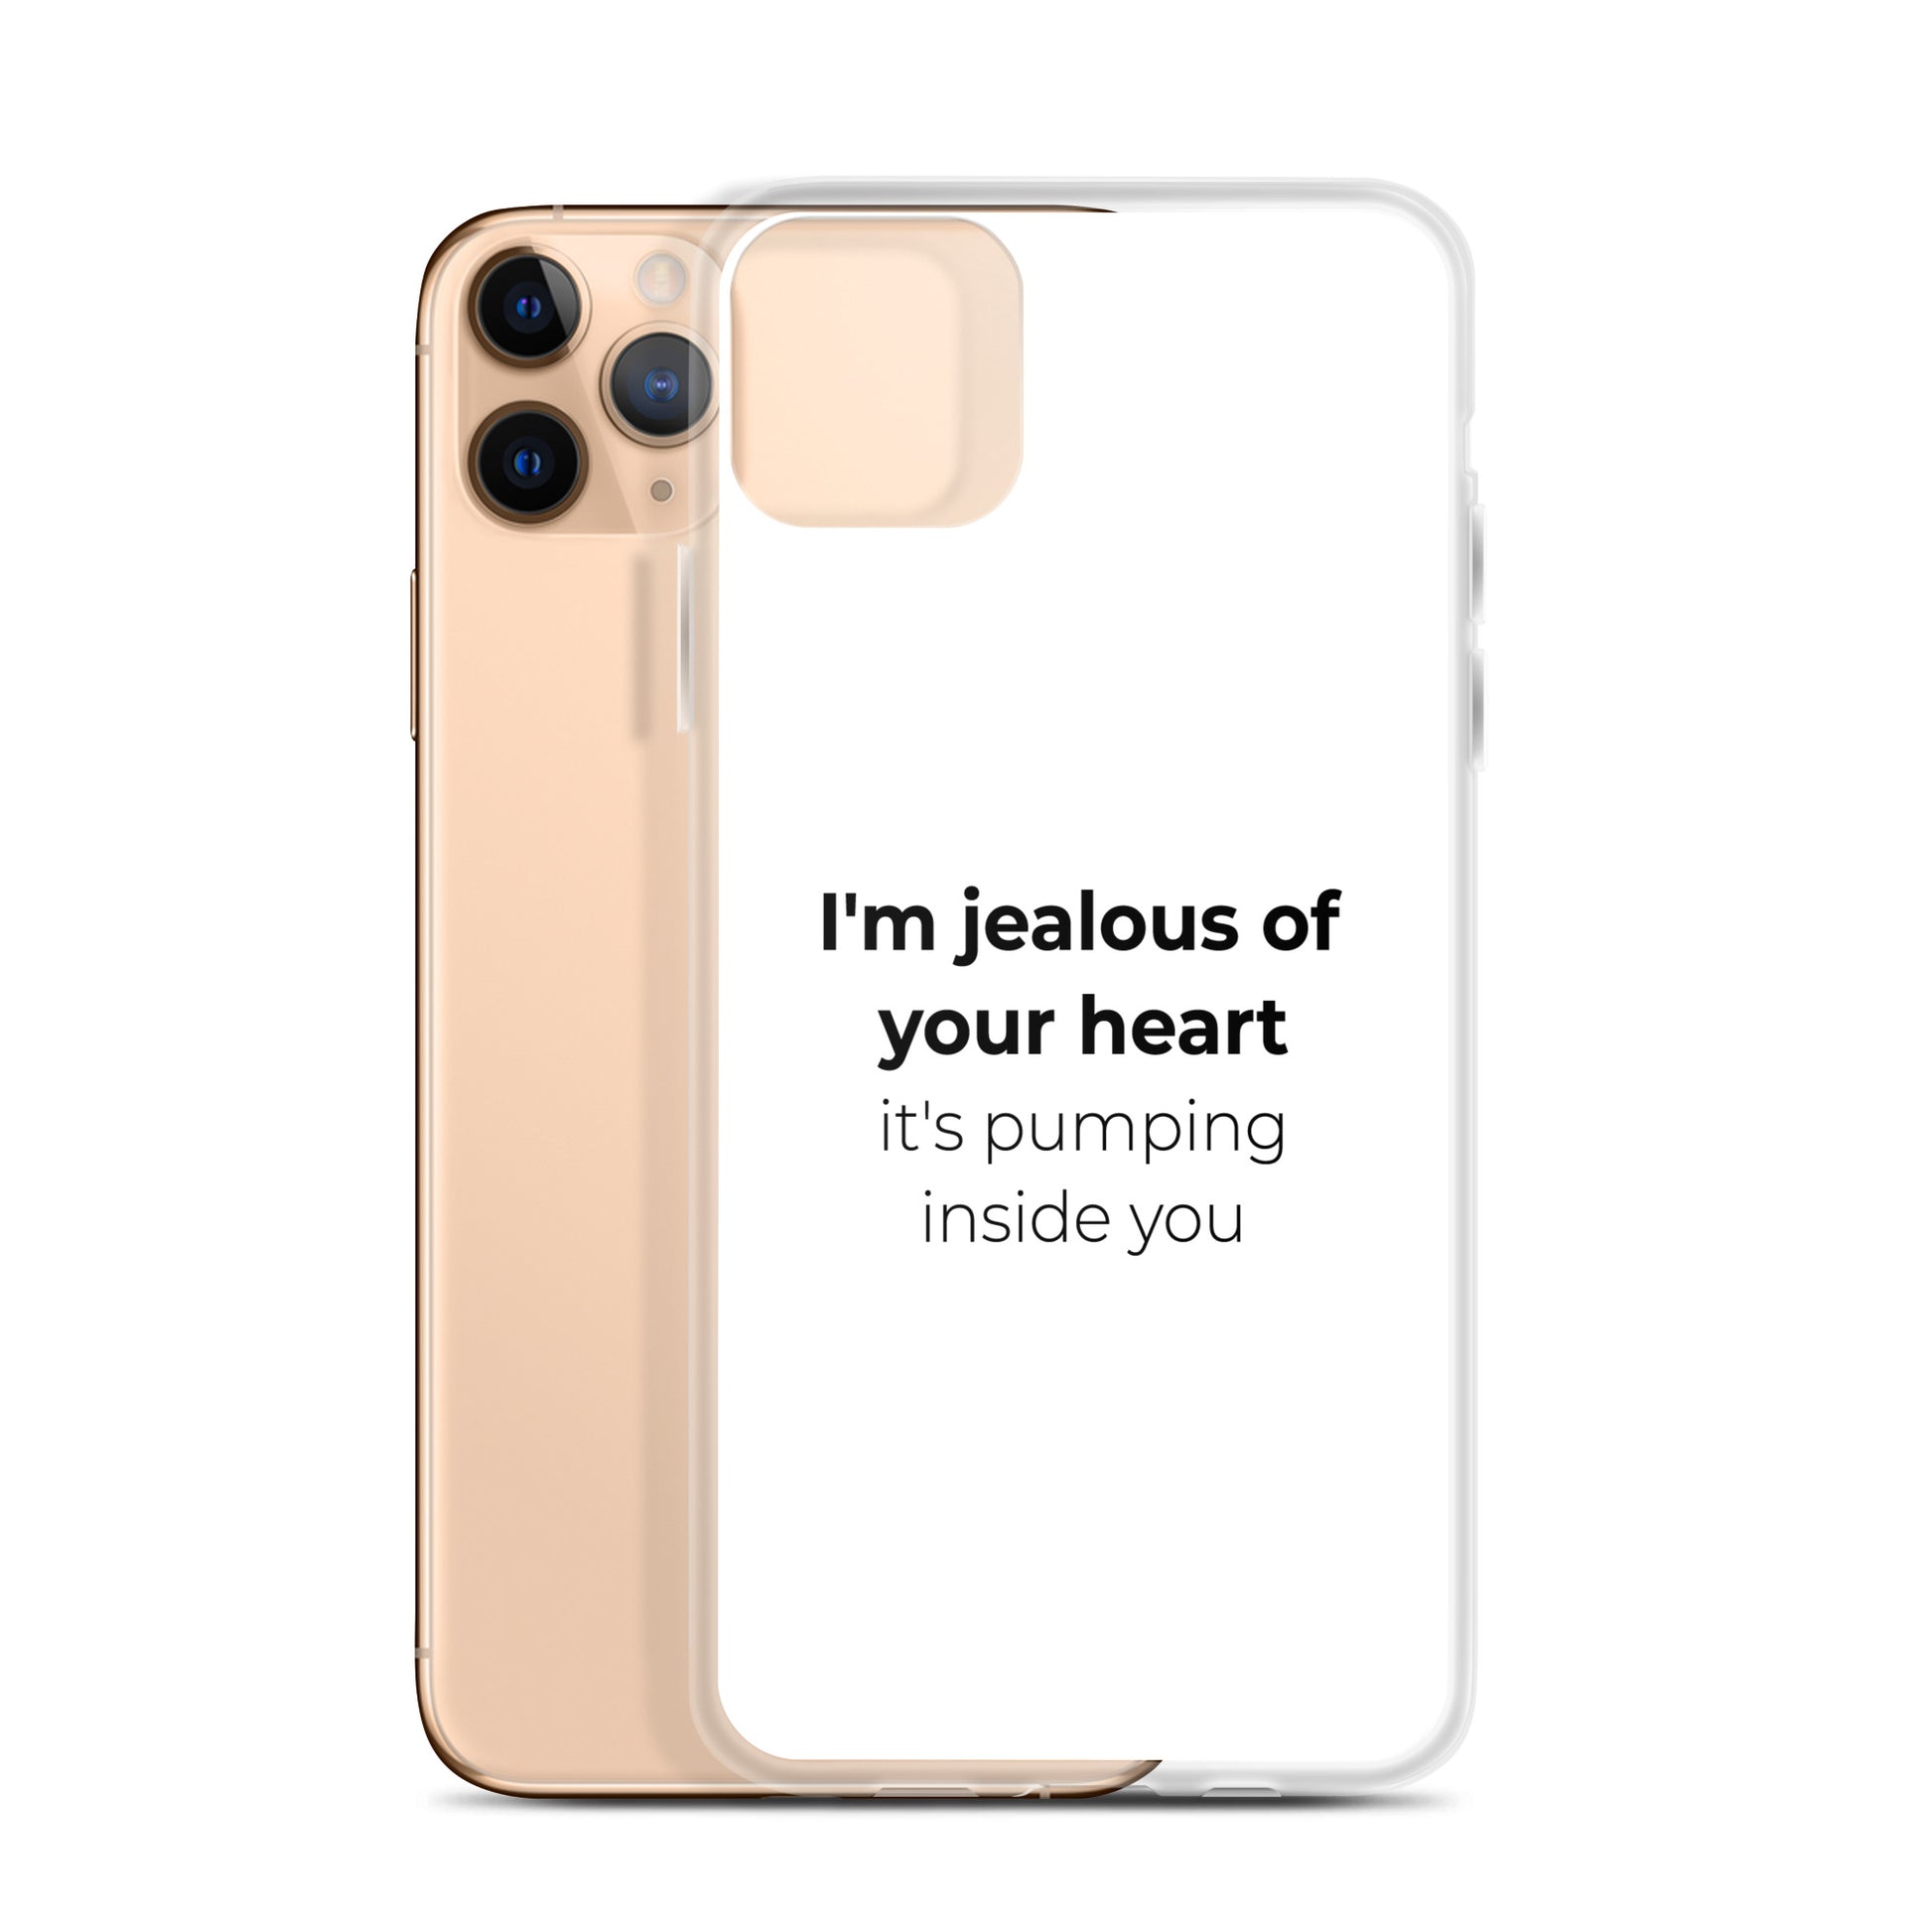 Coque iPhone I'm jealous of your heart it's pumping inside you Sedurro